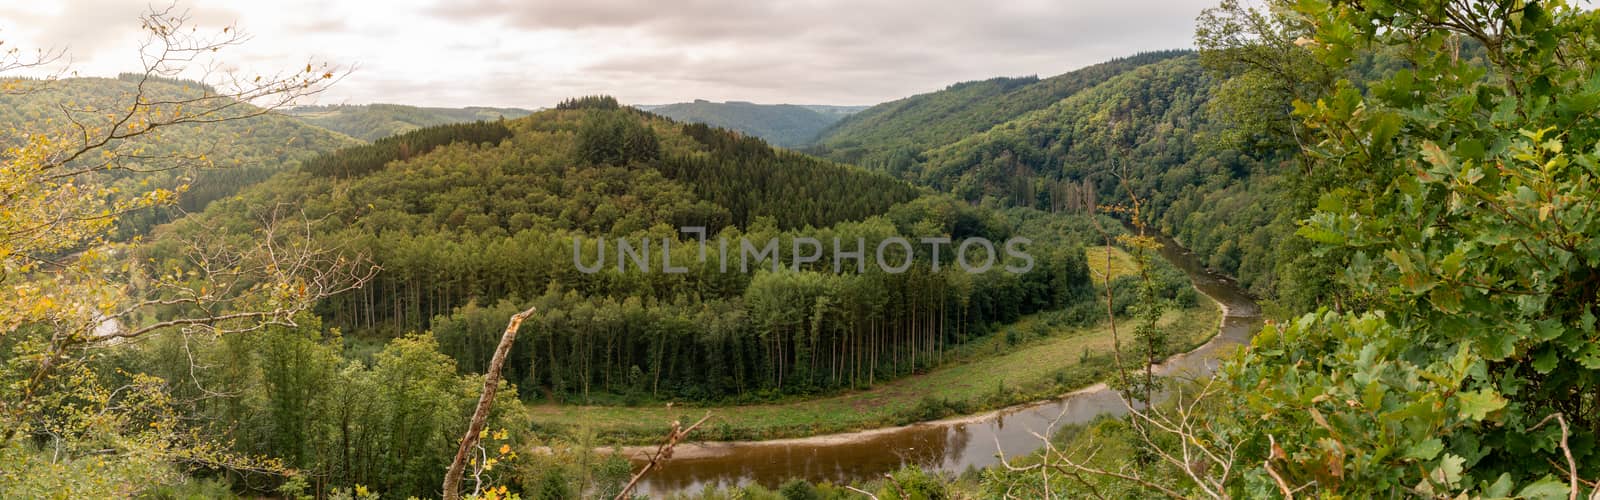 River Semois, Bouillon area, close to Rochehaut, as seen on the Les Echelles or laddertjeswandeling by kb79